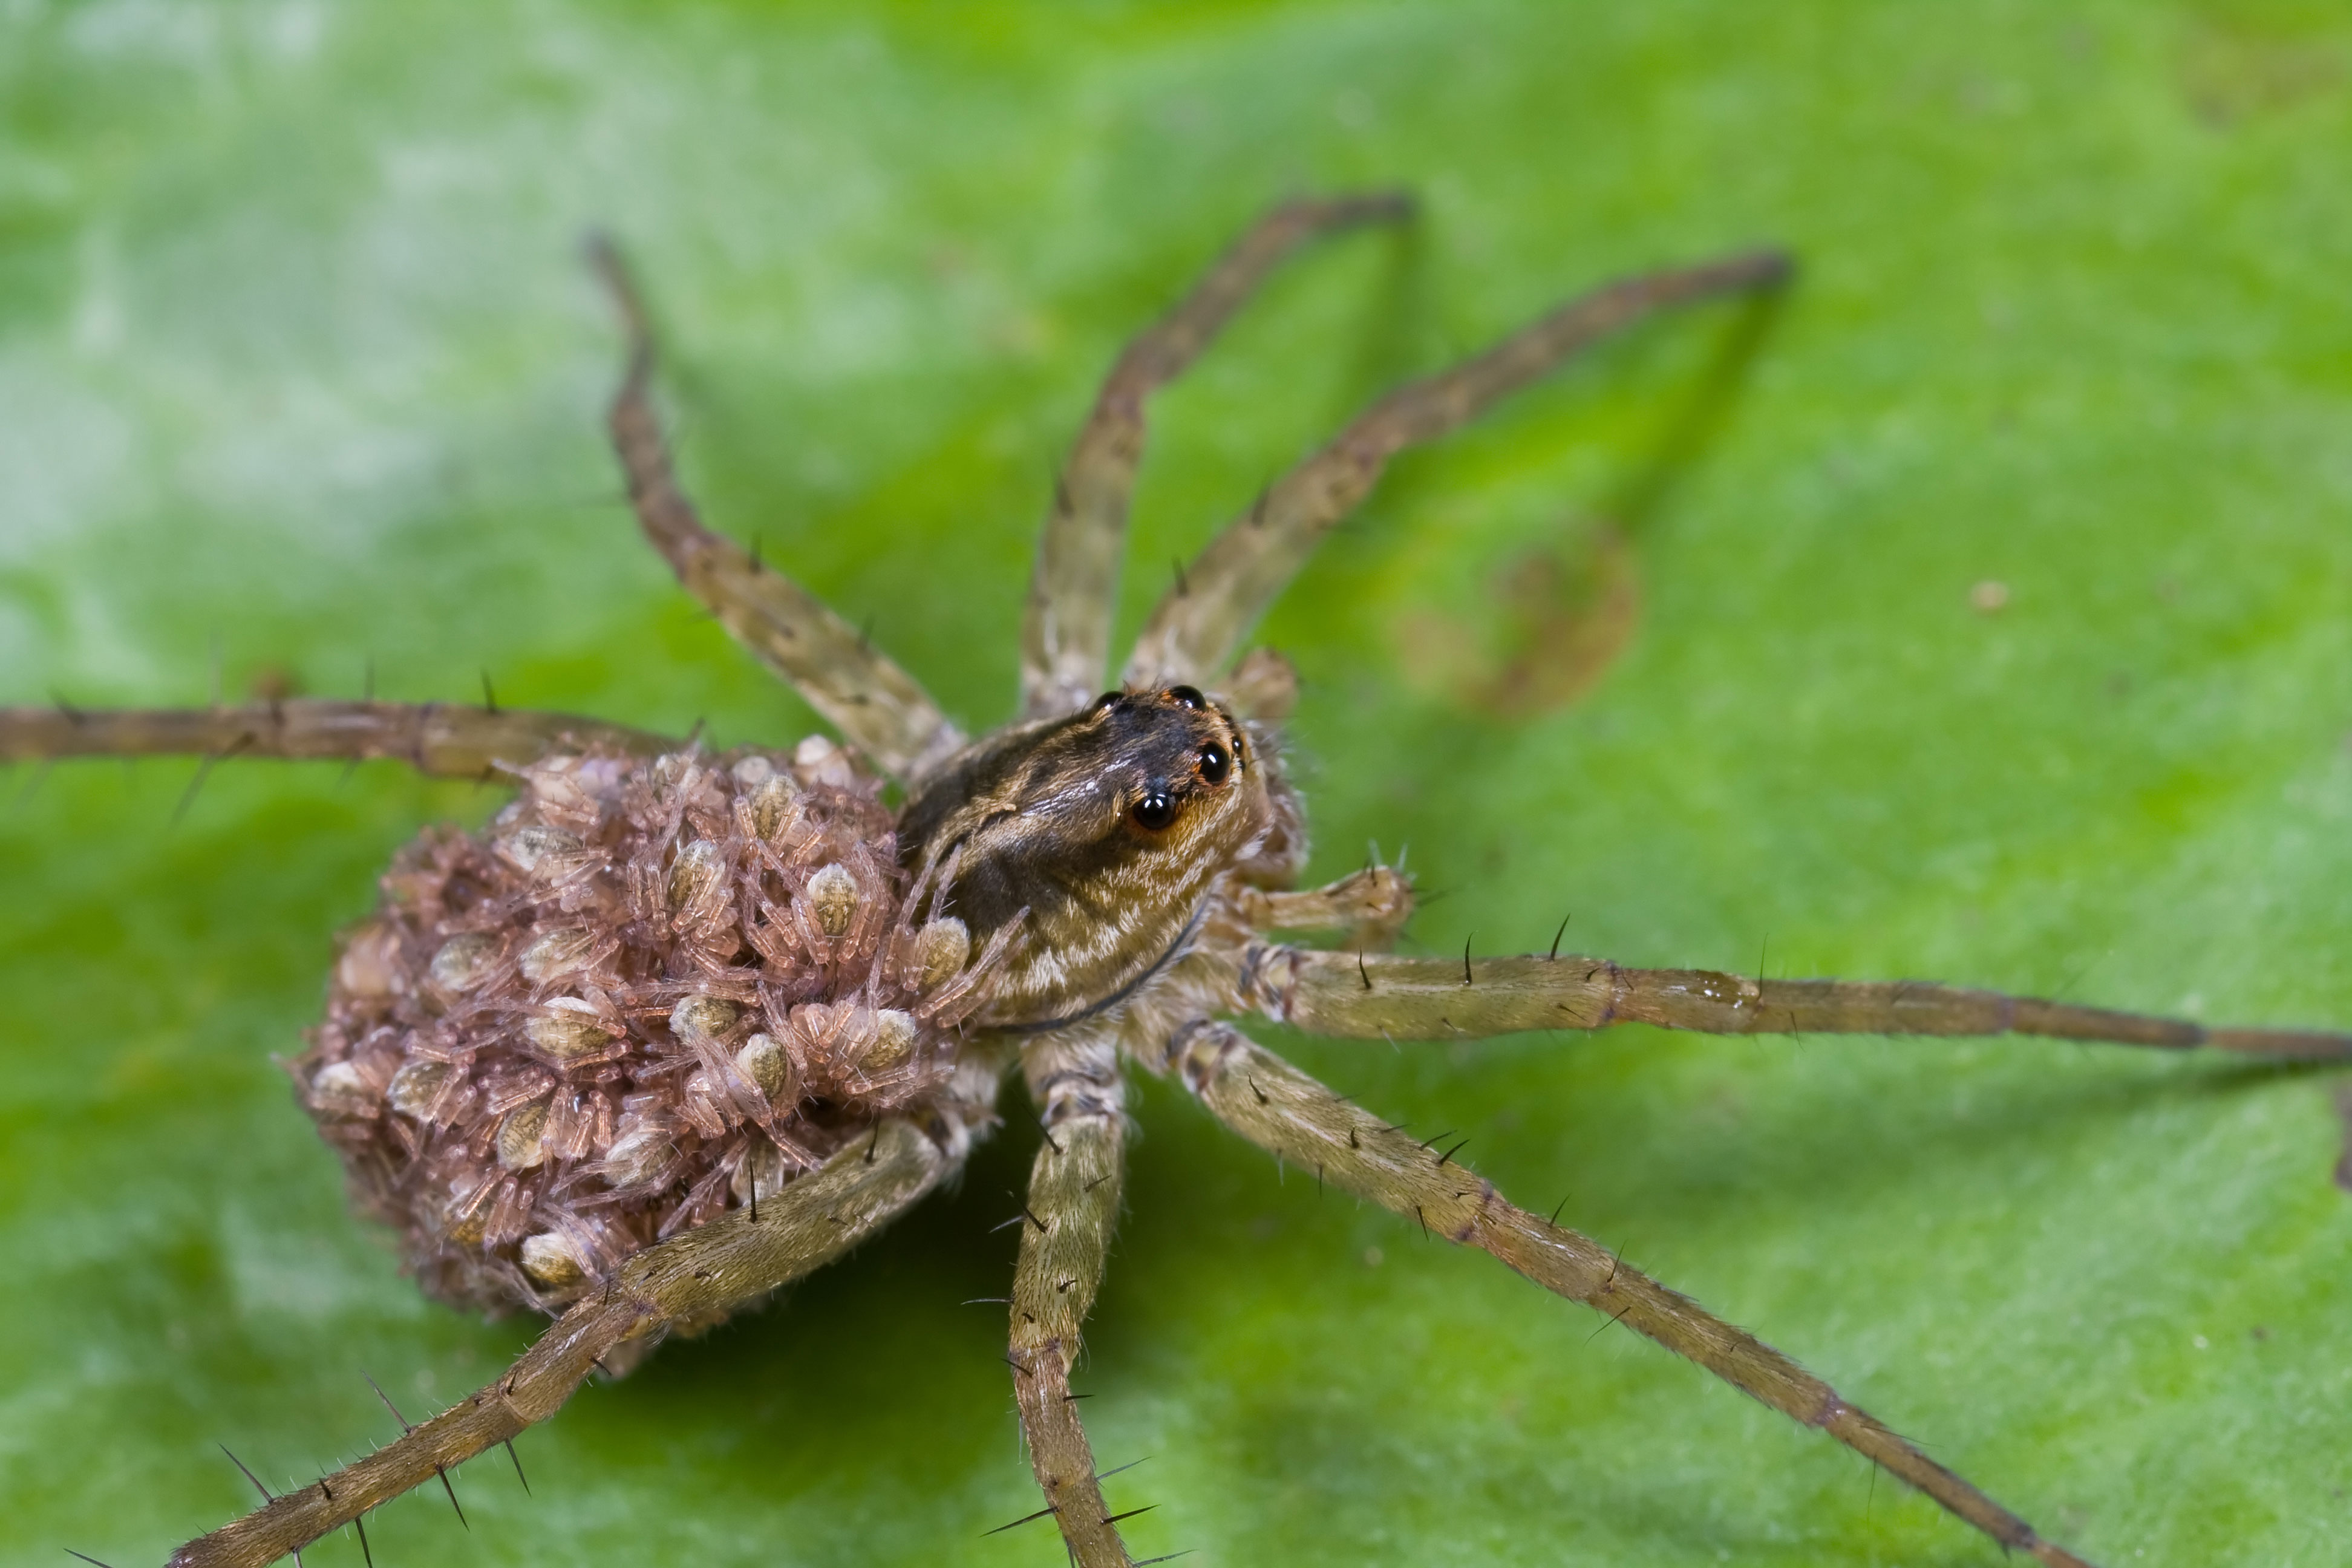 A wolf spider with babies on her back.